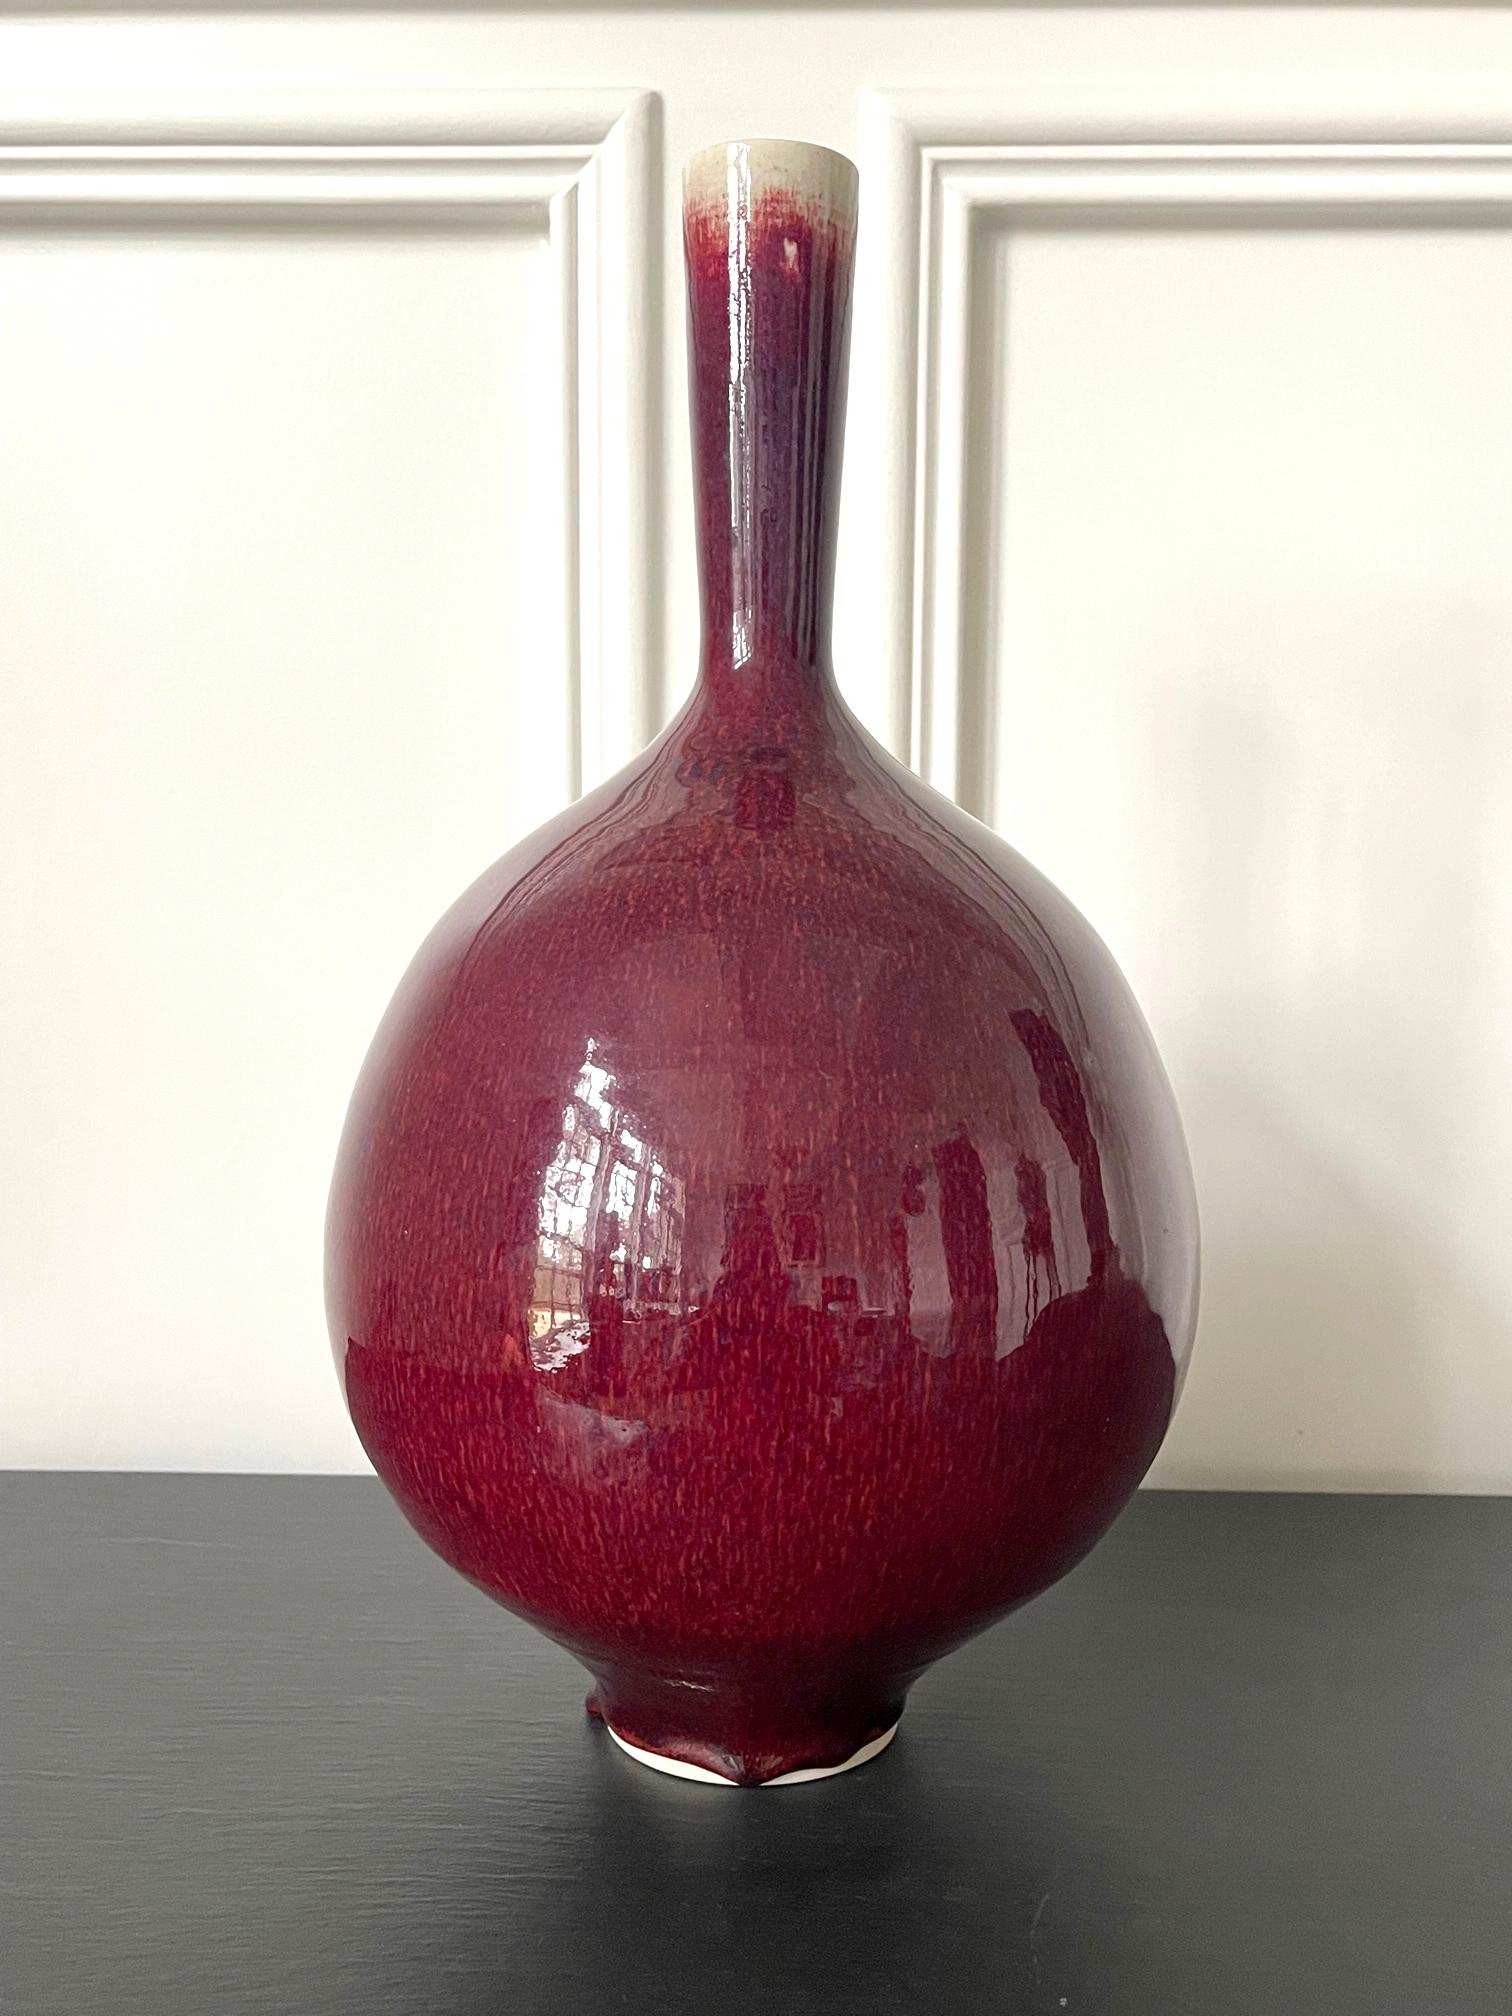 An early ceramic long-neck vase with a brilliant copper red glaze by Benedictine monk potter Brother Thomas Bezanson (1929-2007). The minimalistic and harmonious form with a bulbous body was unmistakably informed by Asian silouette. What is